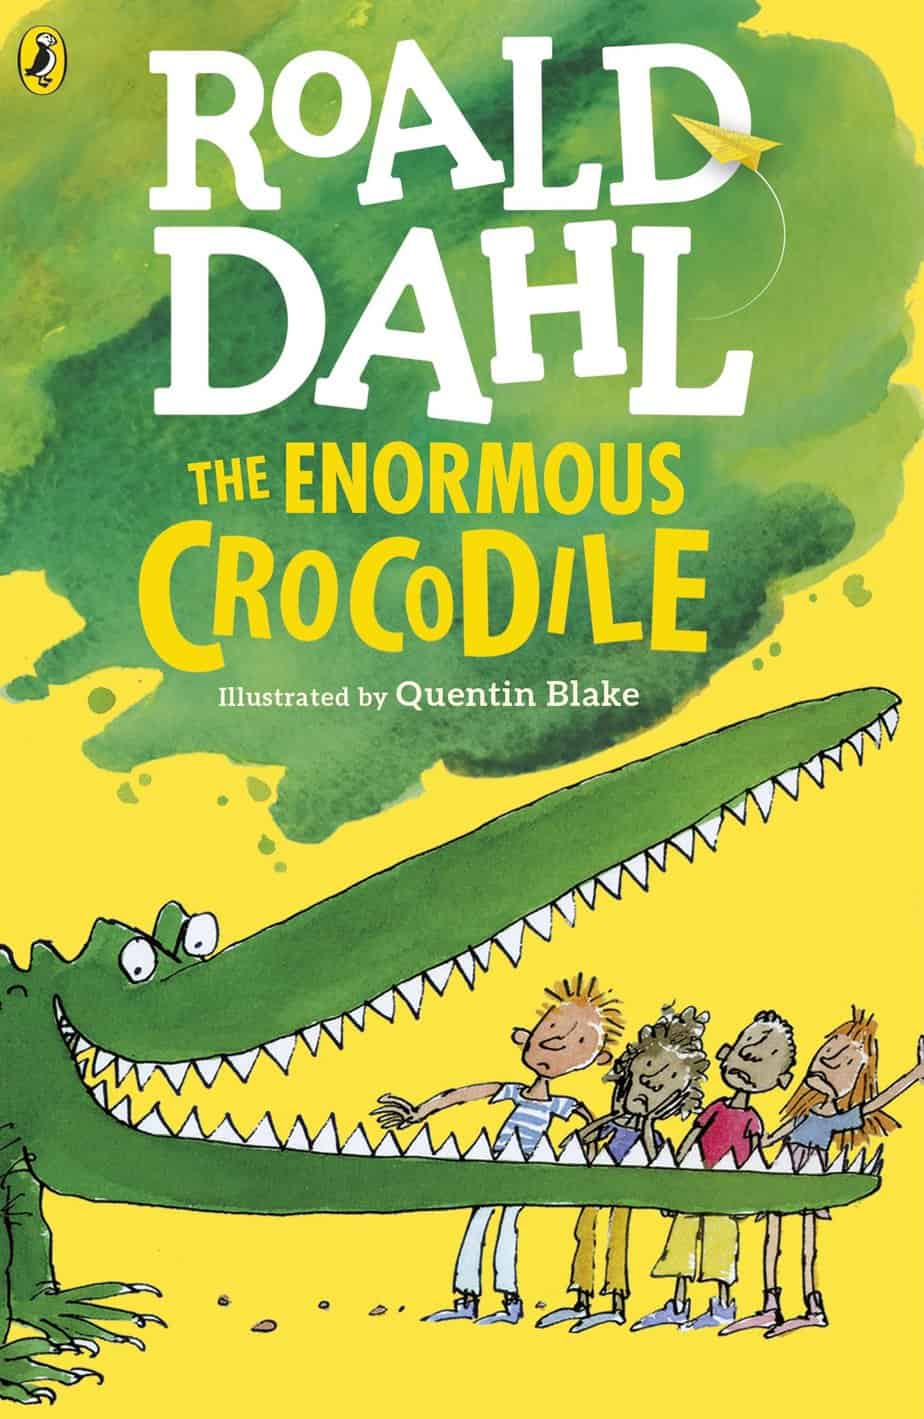 The Enormous Crocodile by Roald Dahl and Quentin Blake